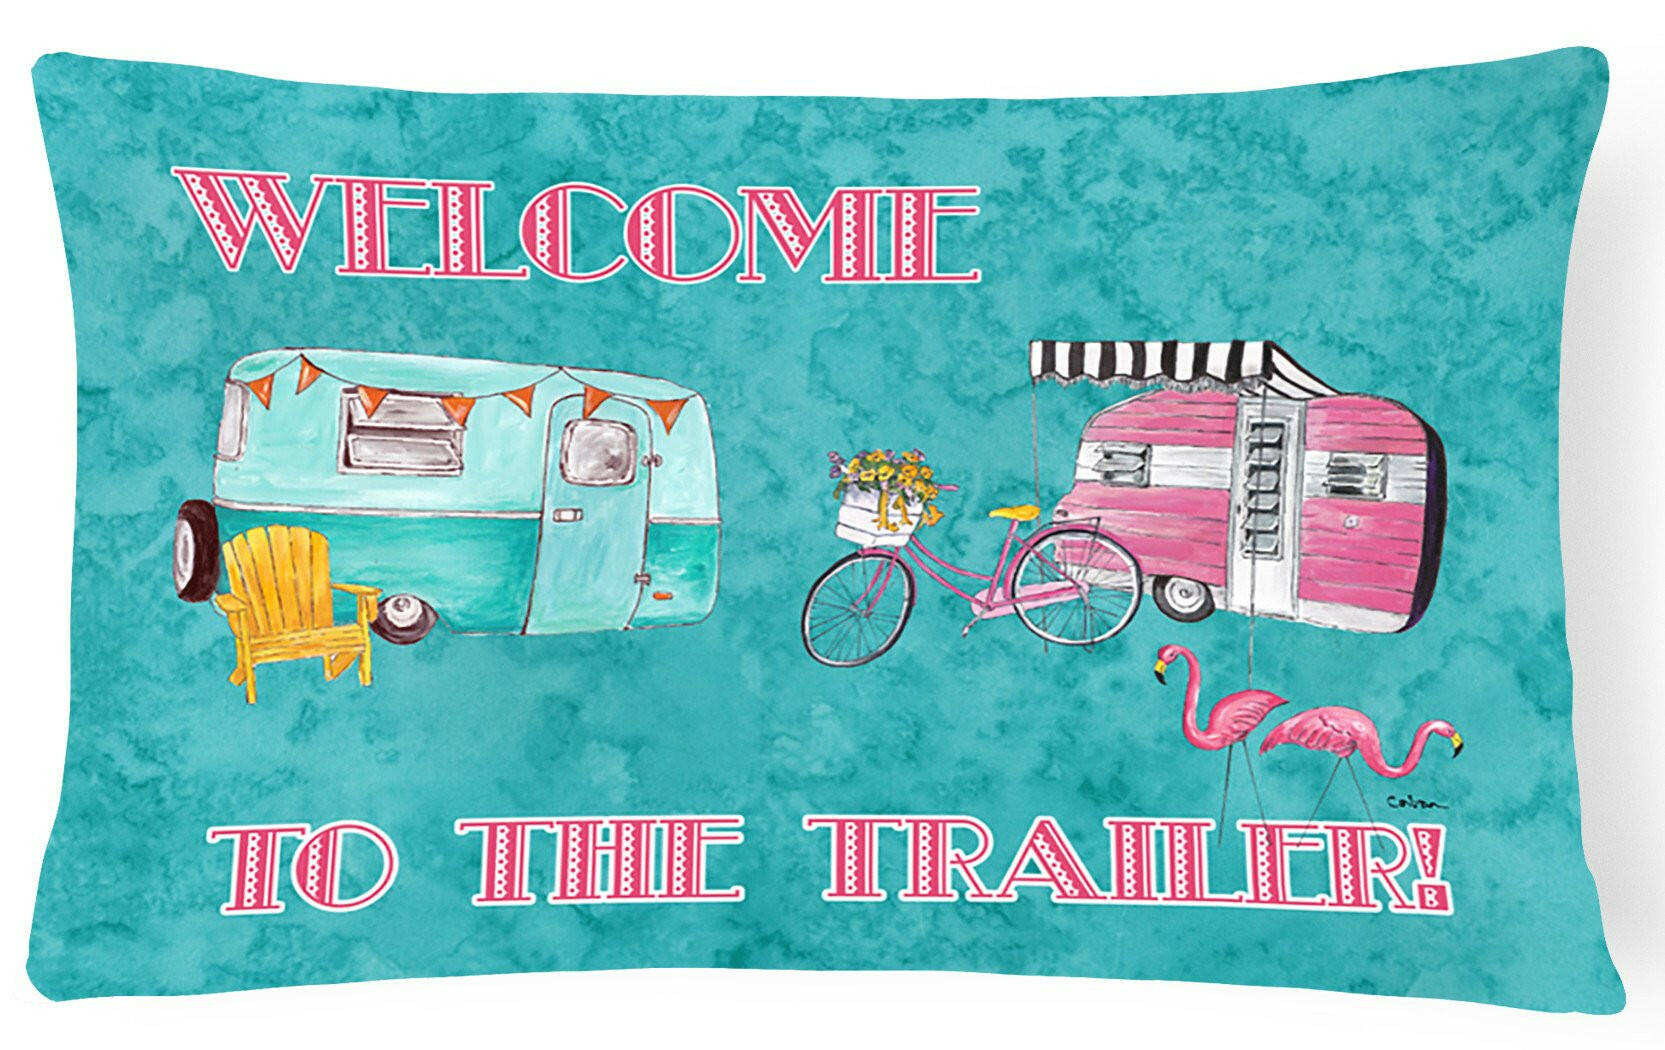 Welcome to the trailer   Canvas Fabric Decorative Pillow by Caroline's Treasures